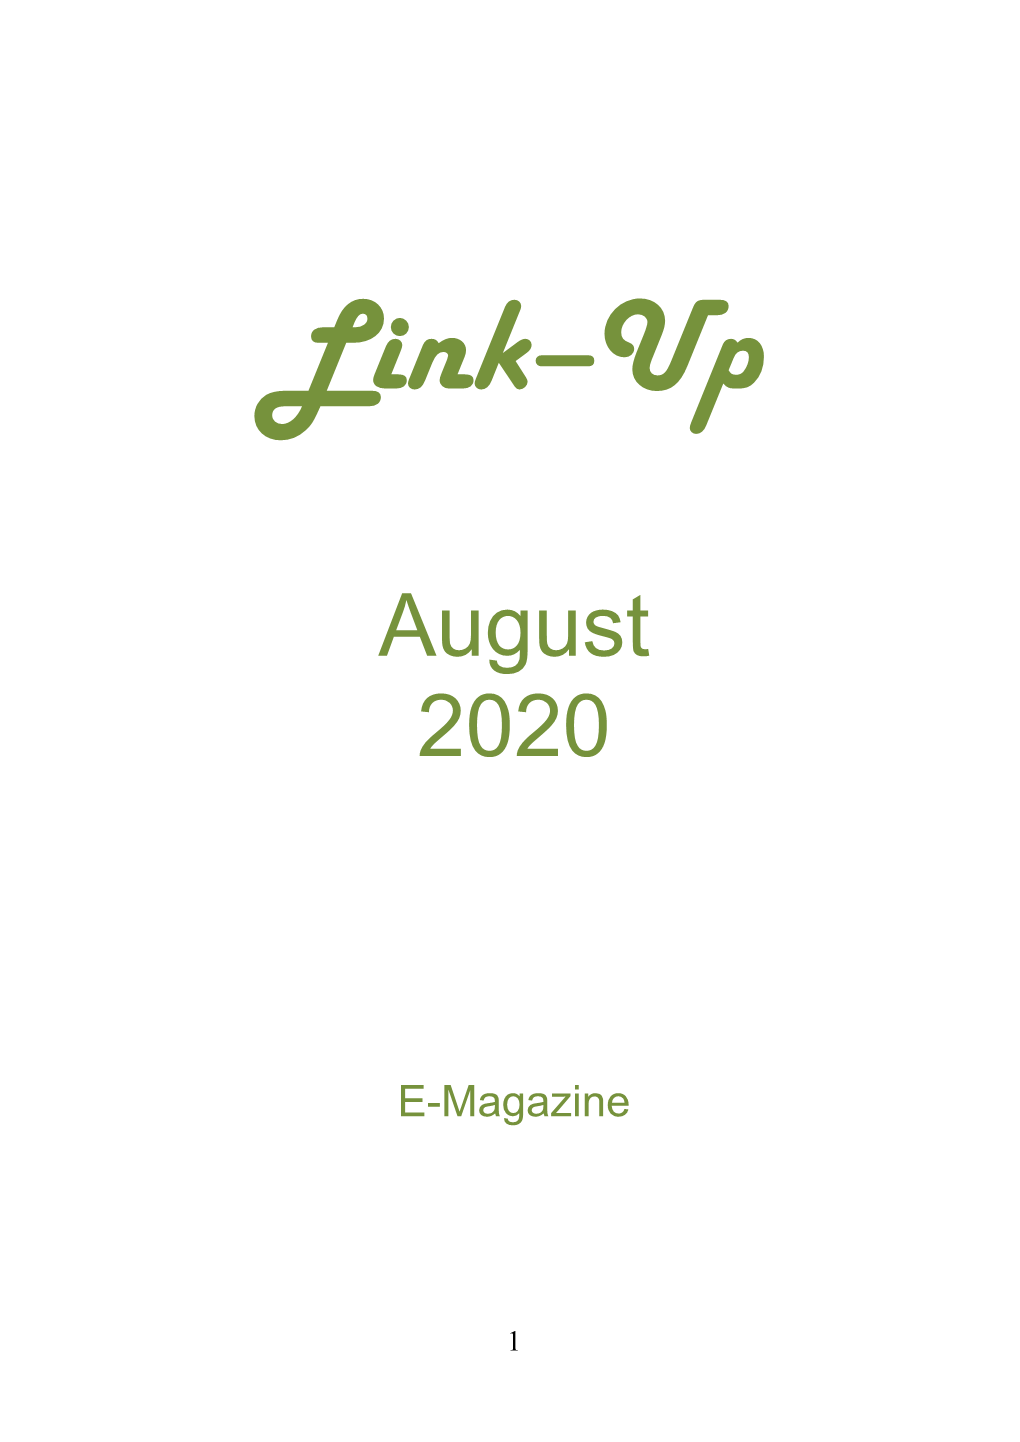 Link-Up August 2020